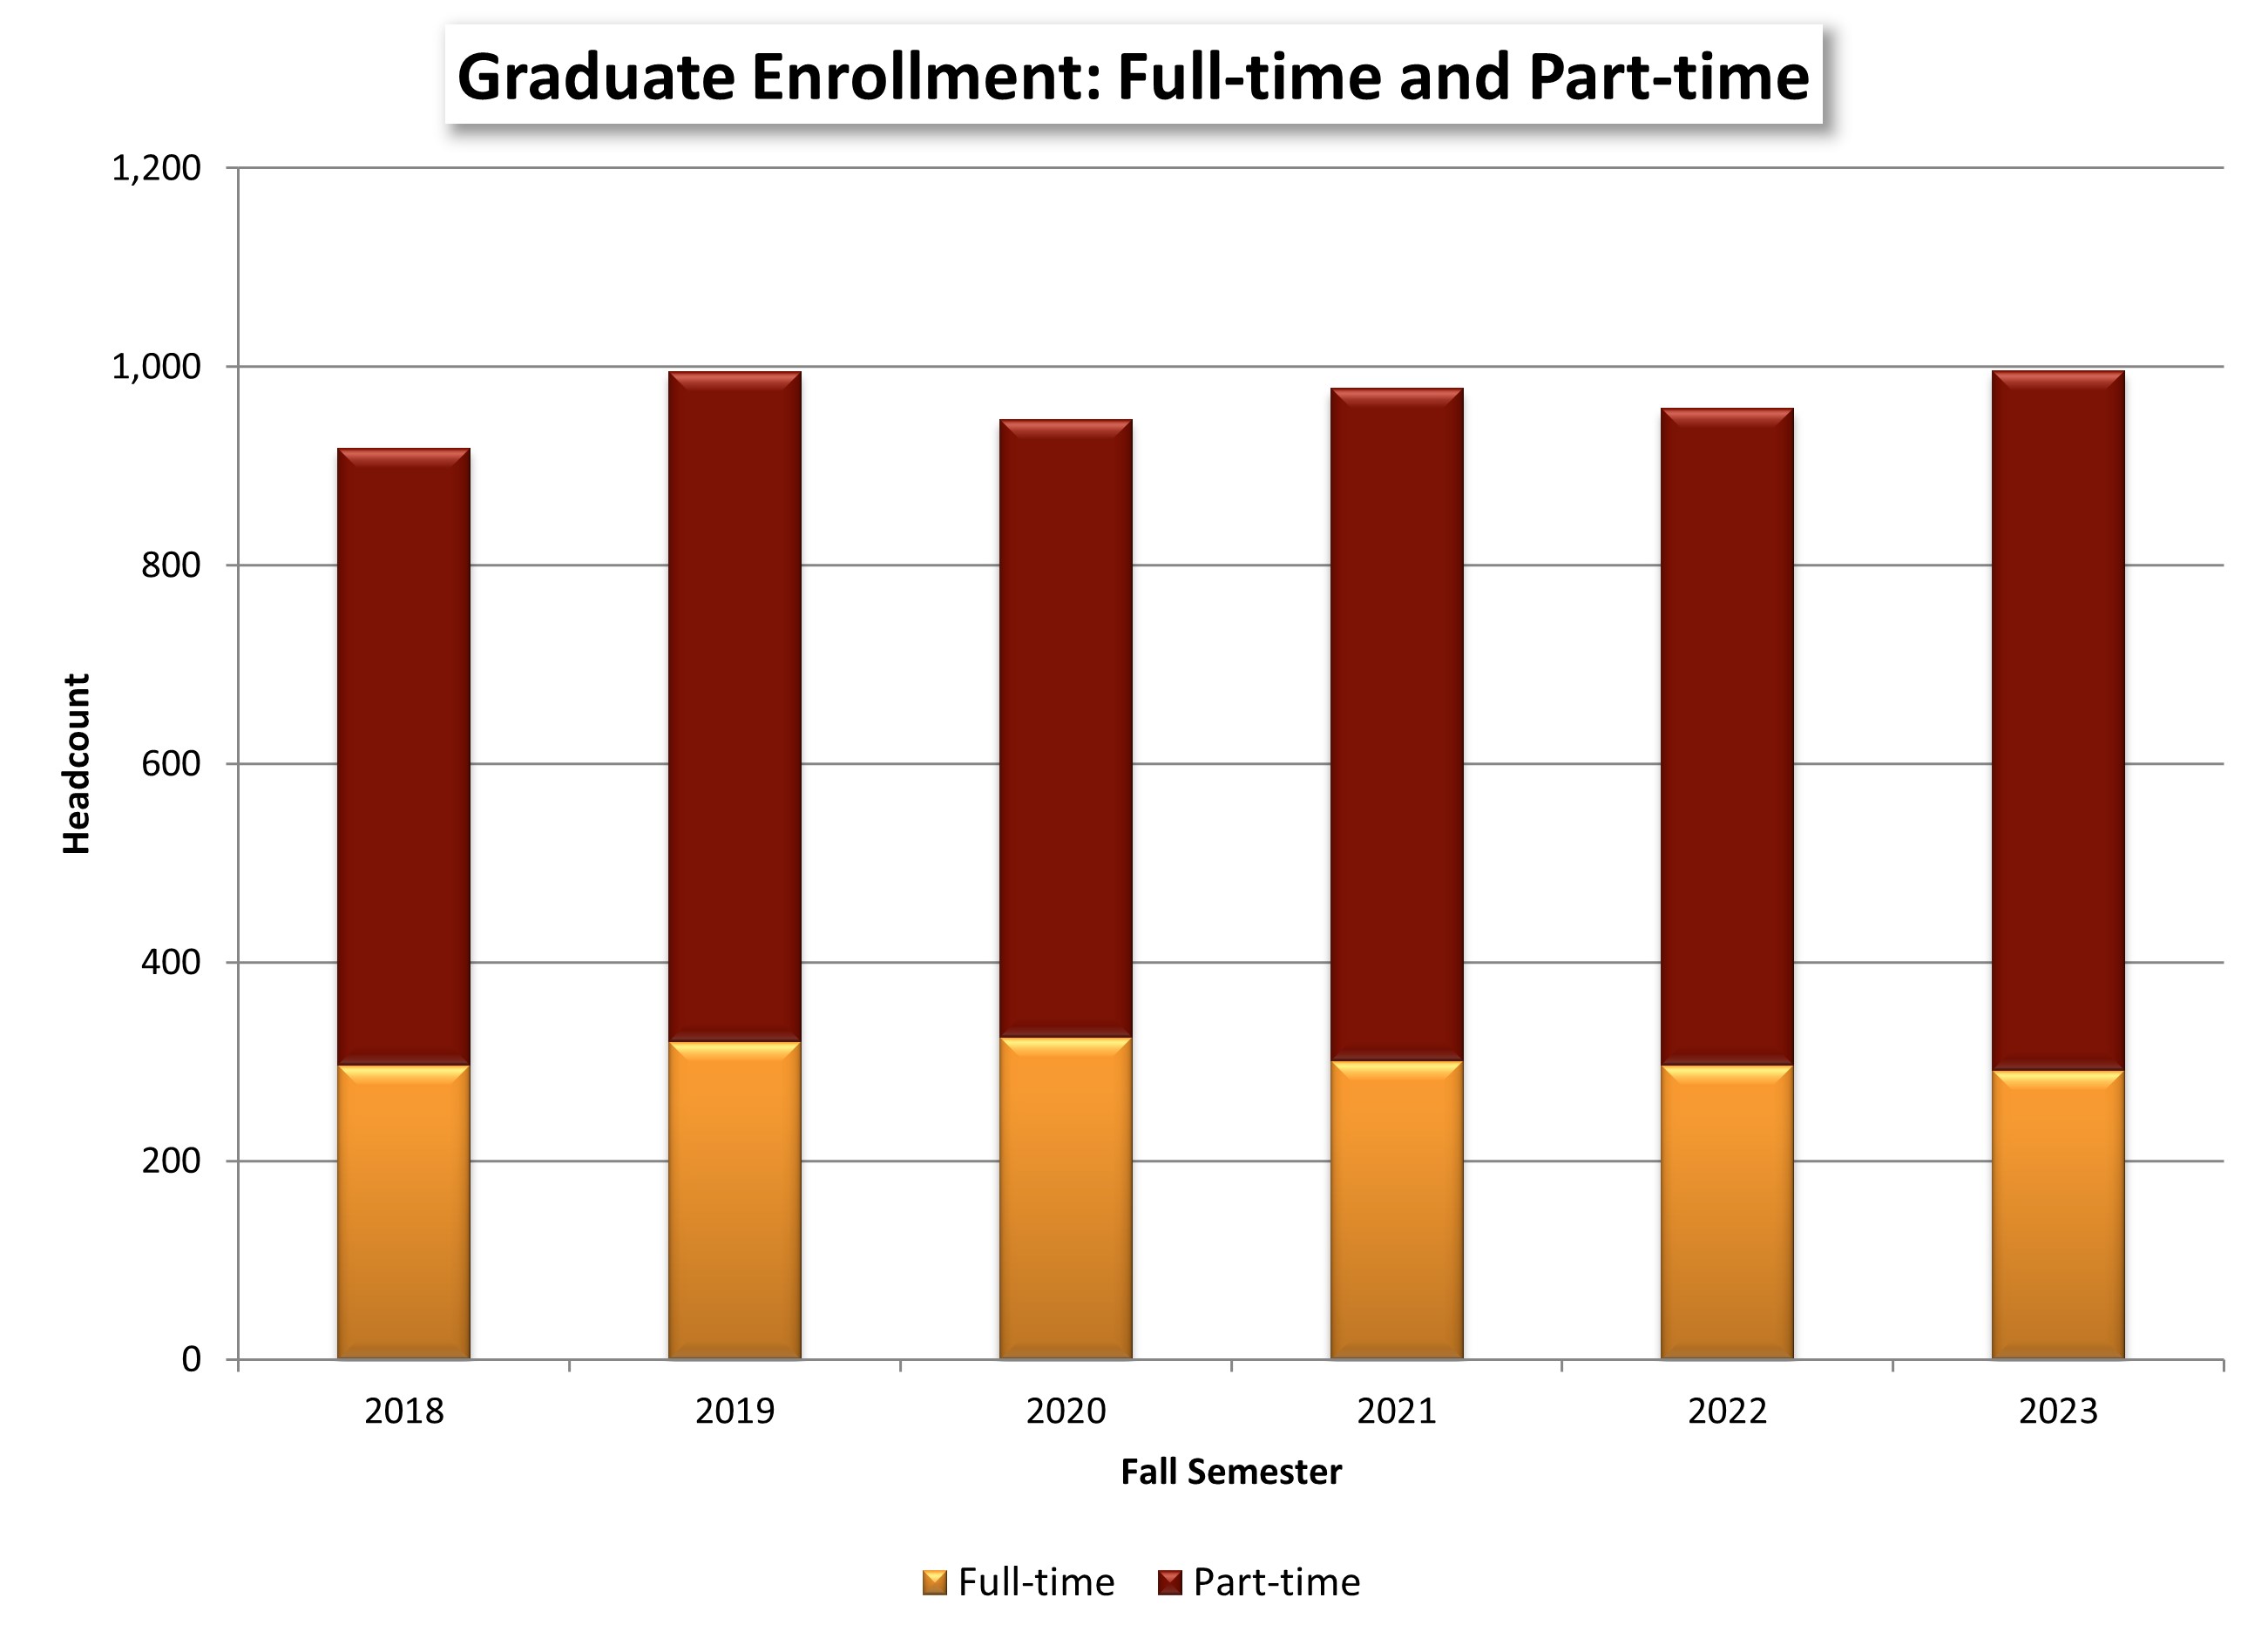 Graduate Enrollment: Full-time and Part-time chart